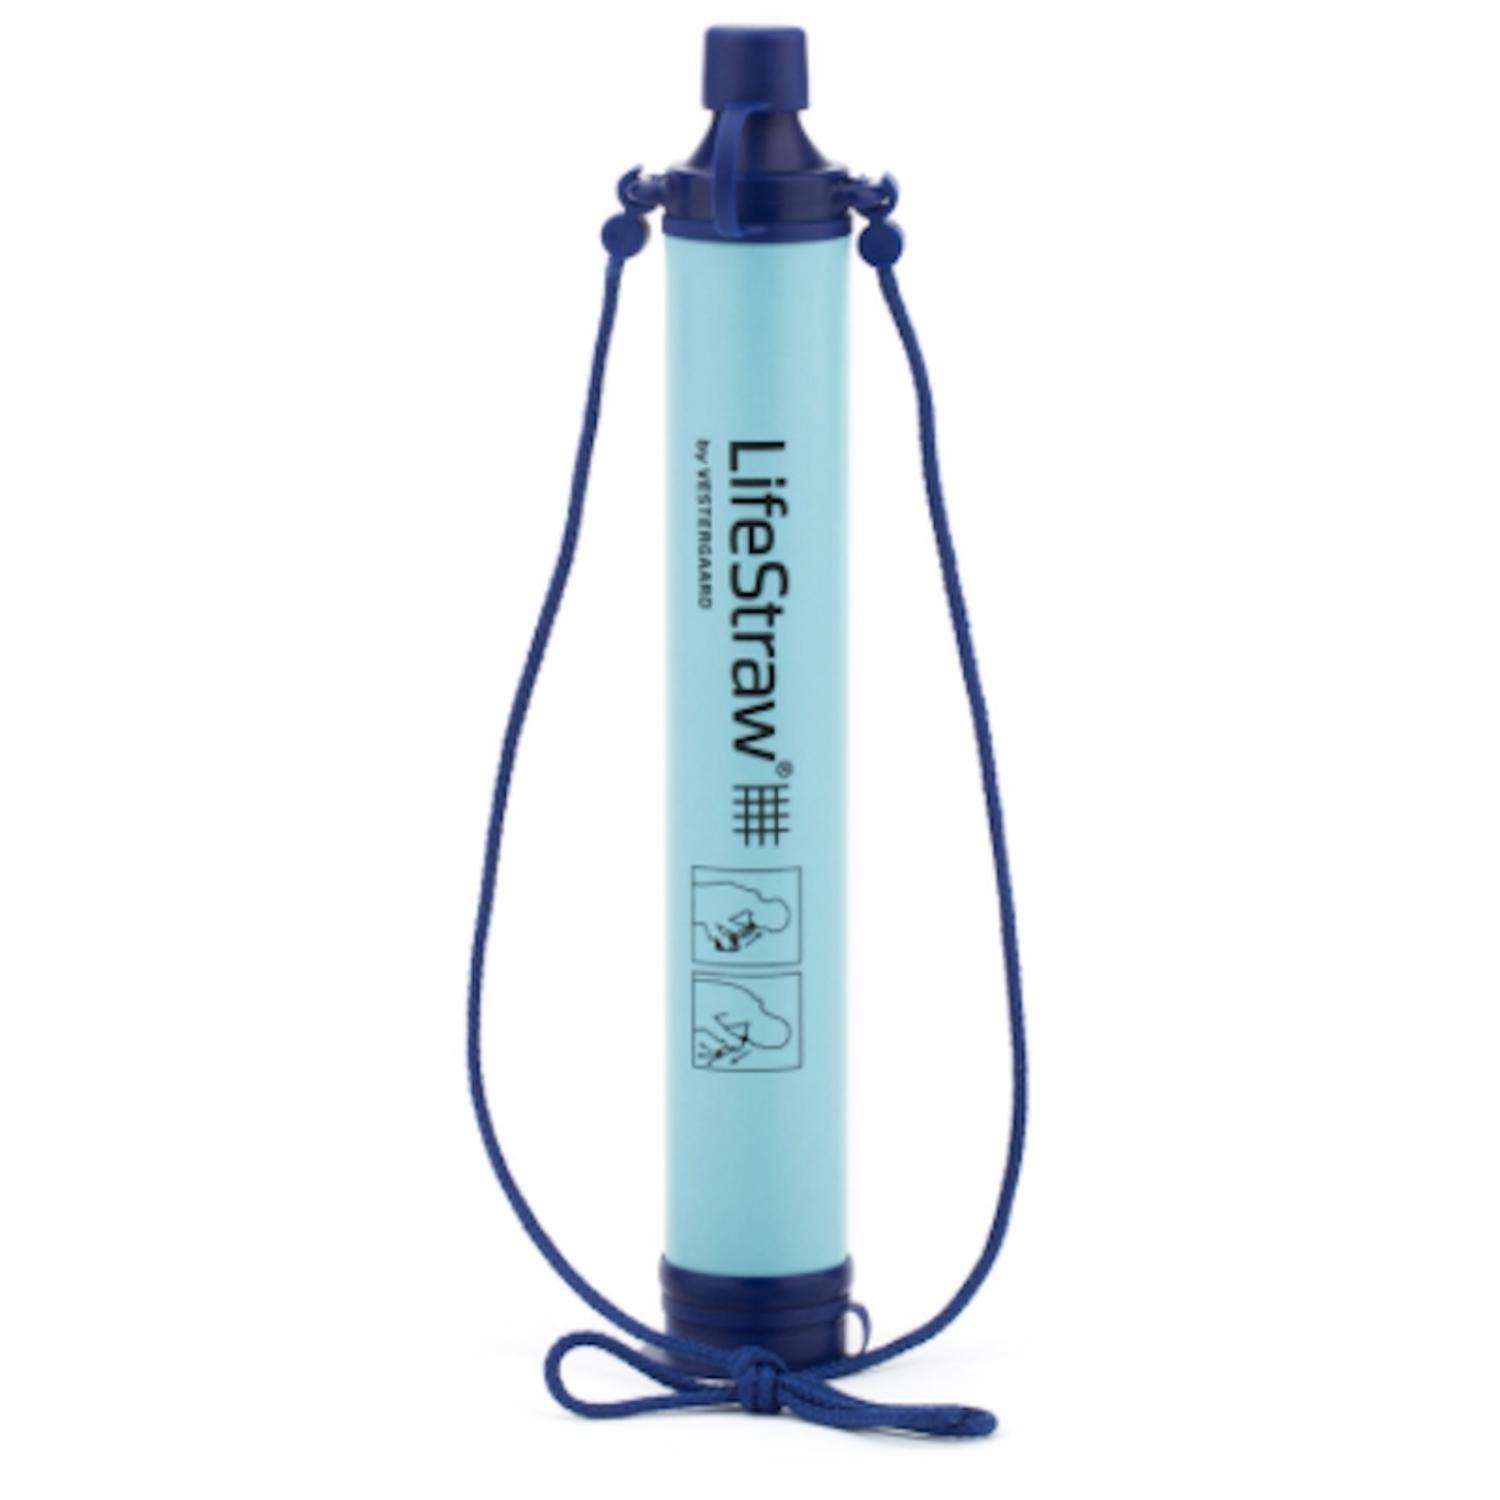 Portable Straw Kettle Bag Carrying Case For LifeStraw Life Straw Water Purifier 